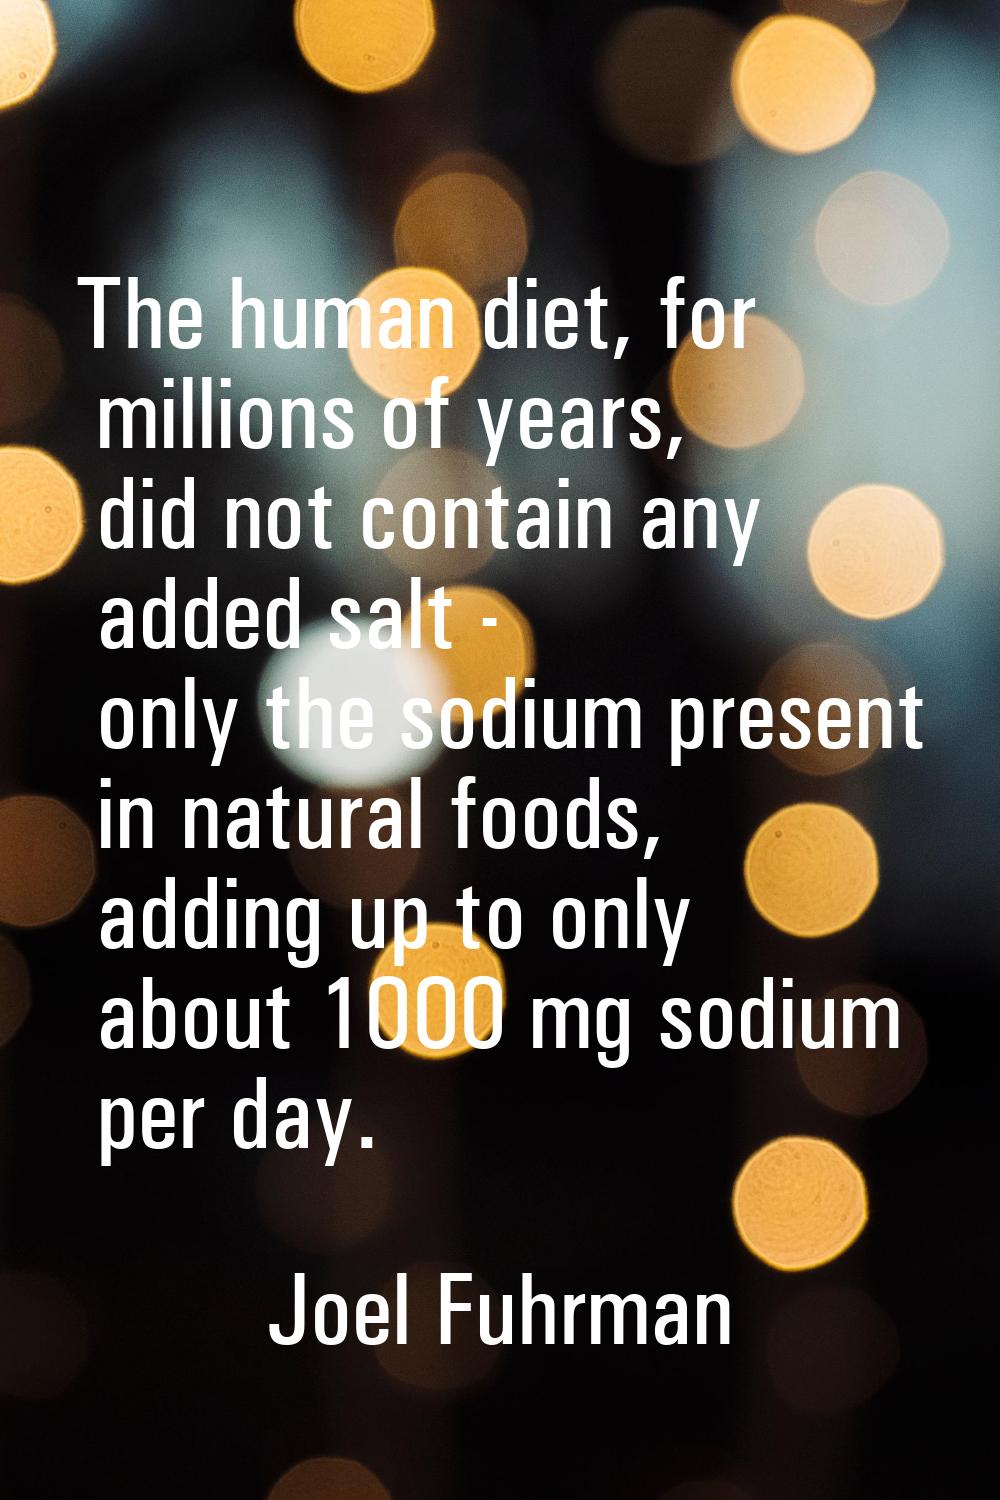 The human diet, for millions of years, did not contain any added salt - only the sodium present in 